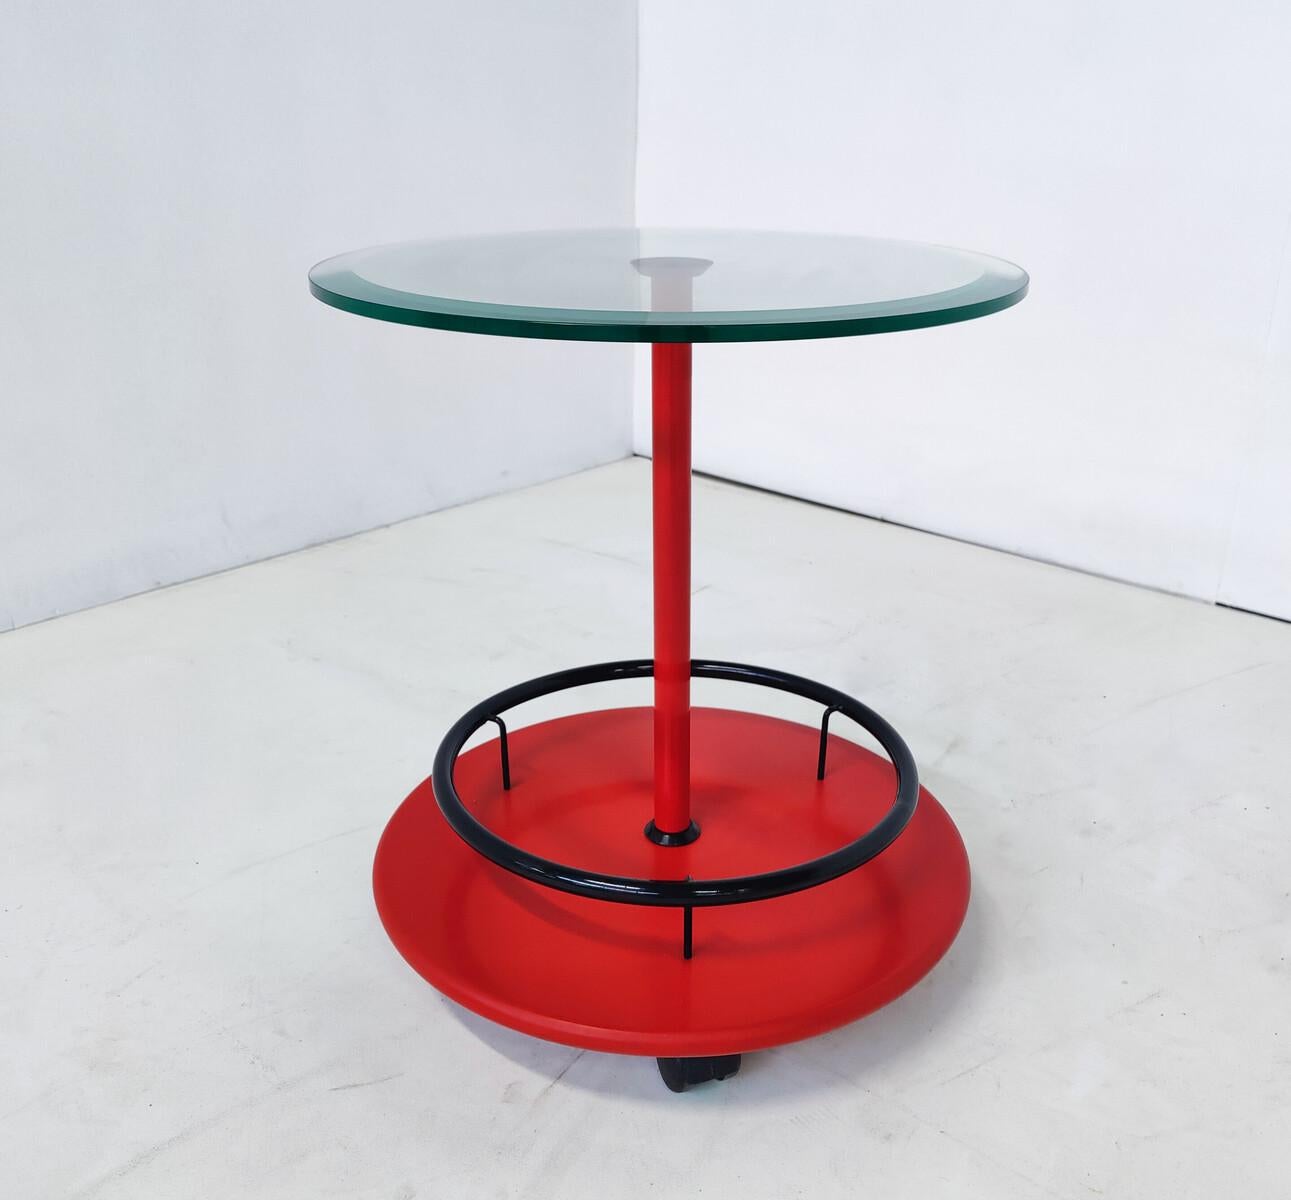 Mid-Century Modern Italian rolling side table, metal and glass, 1950s.